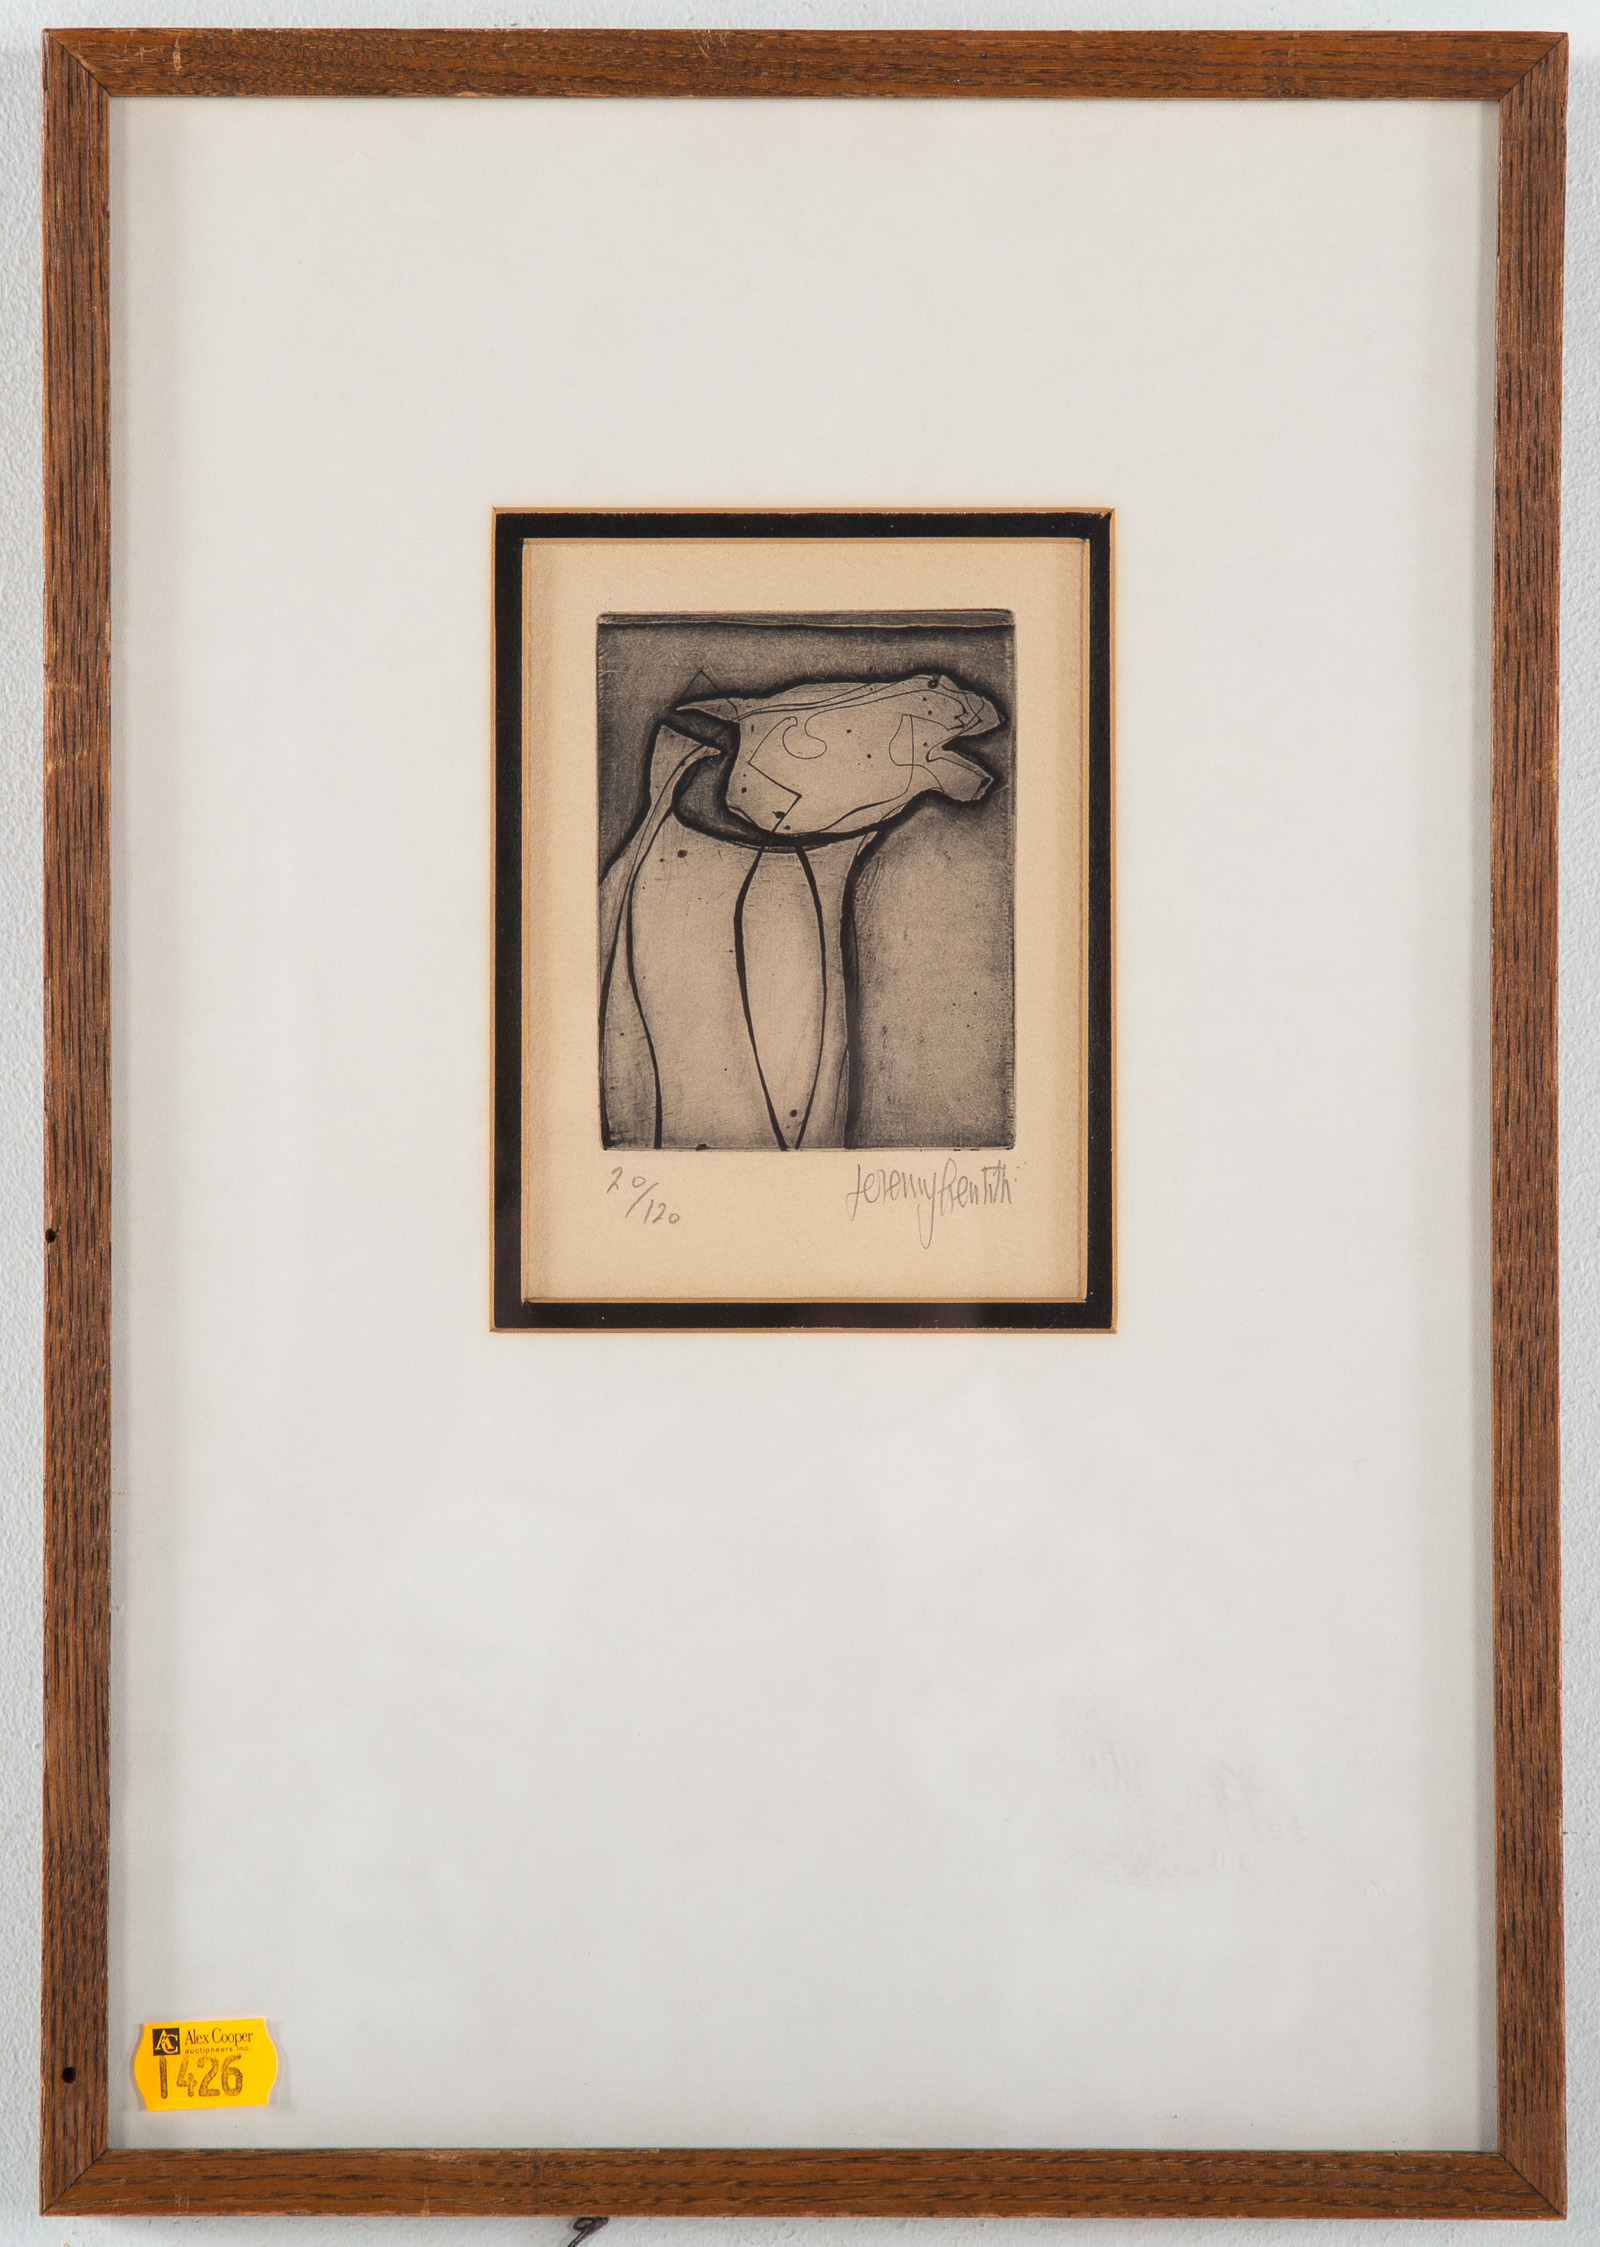 JEREMY RENLITH. HORSE HEAD, ETCHING